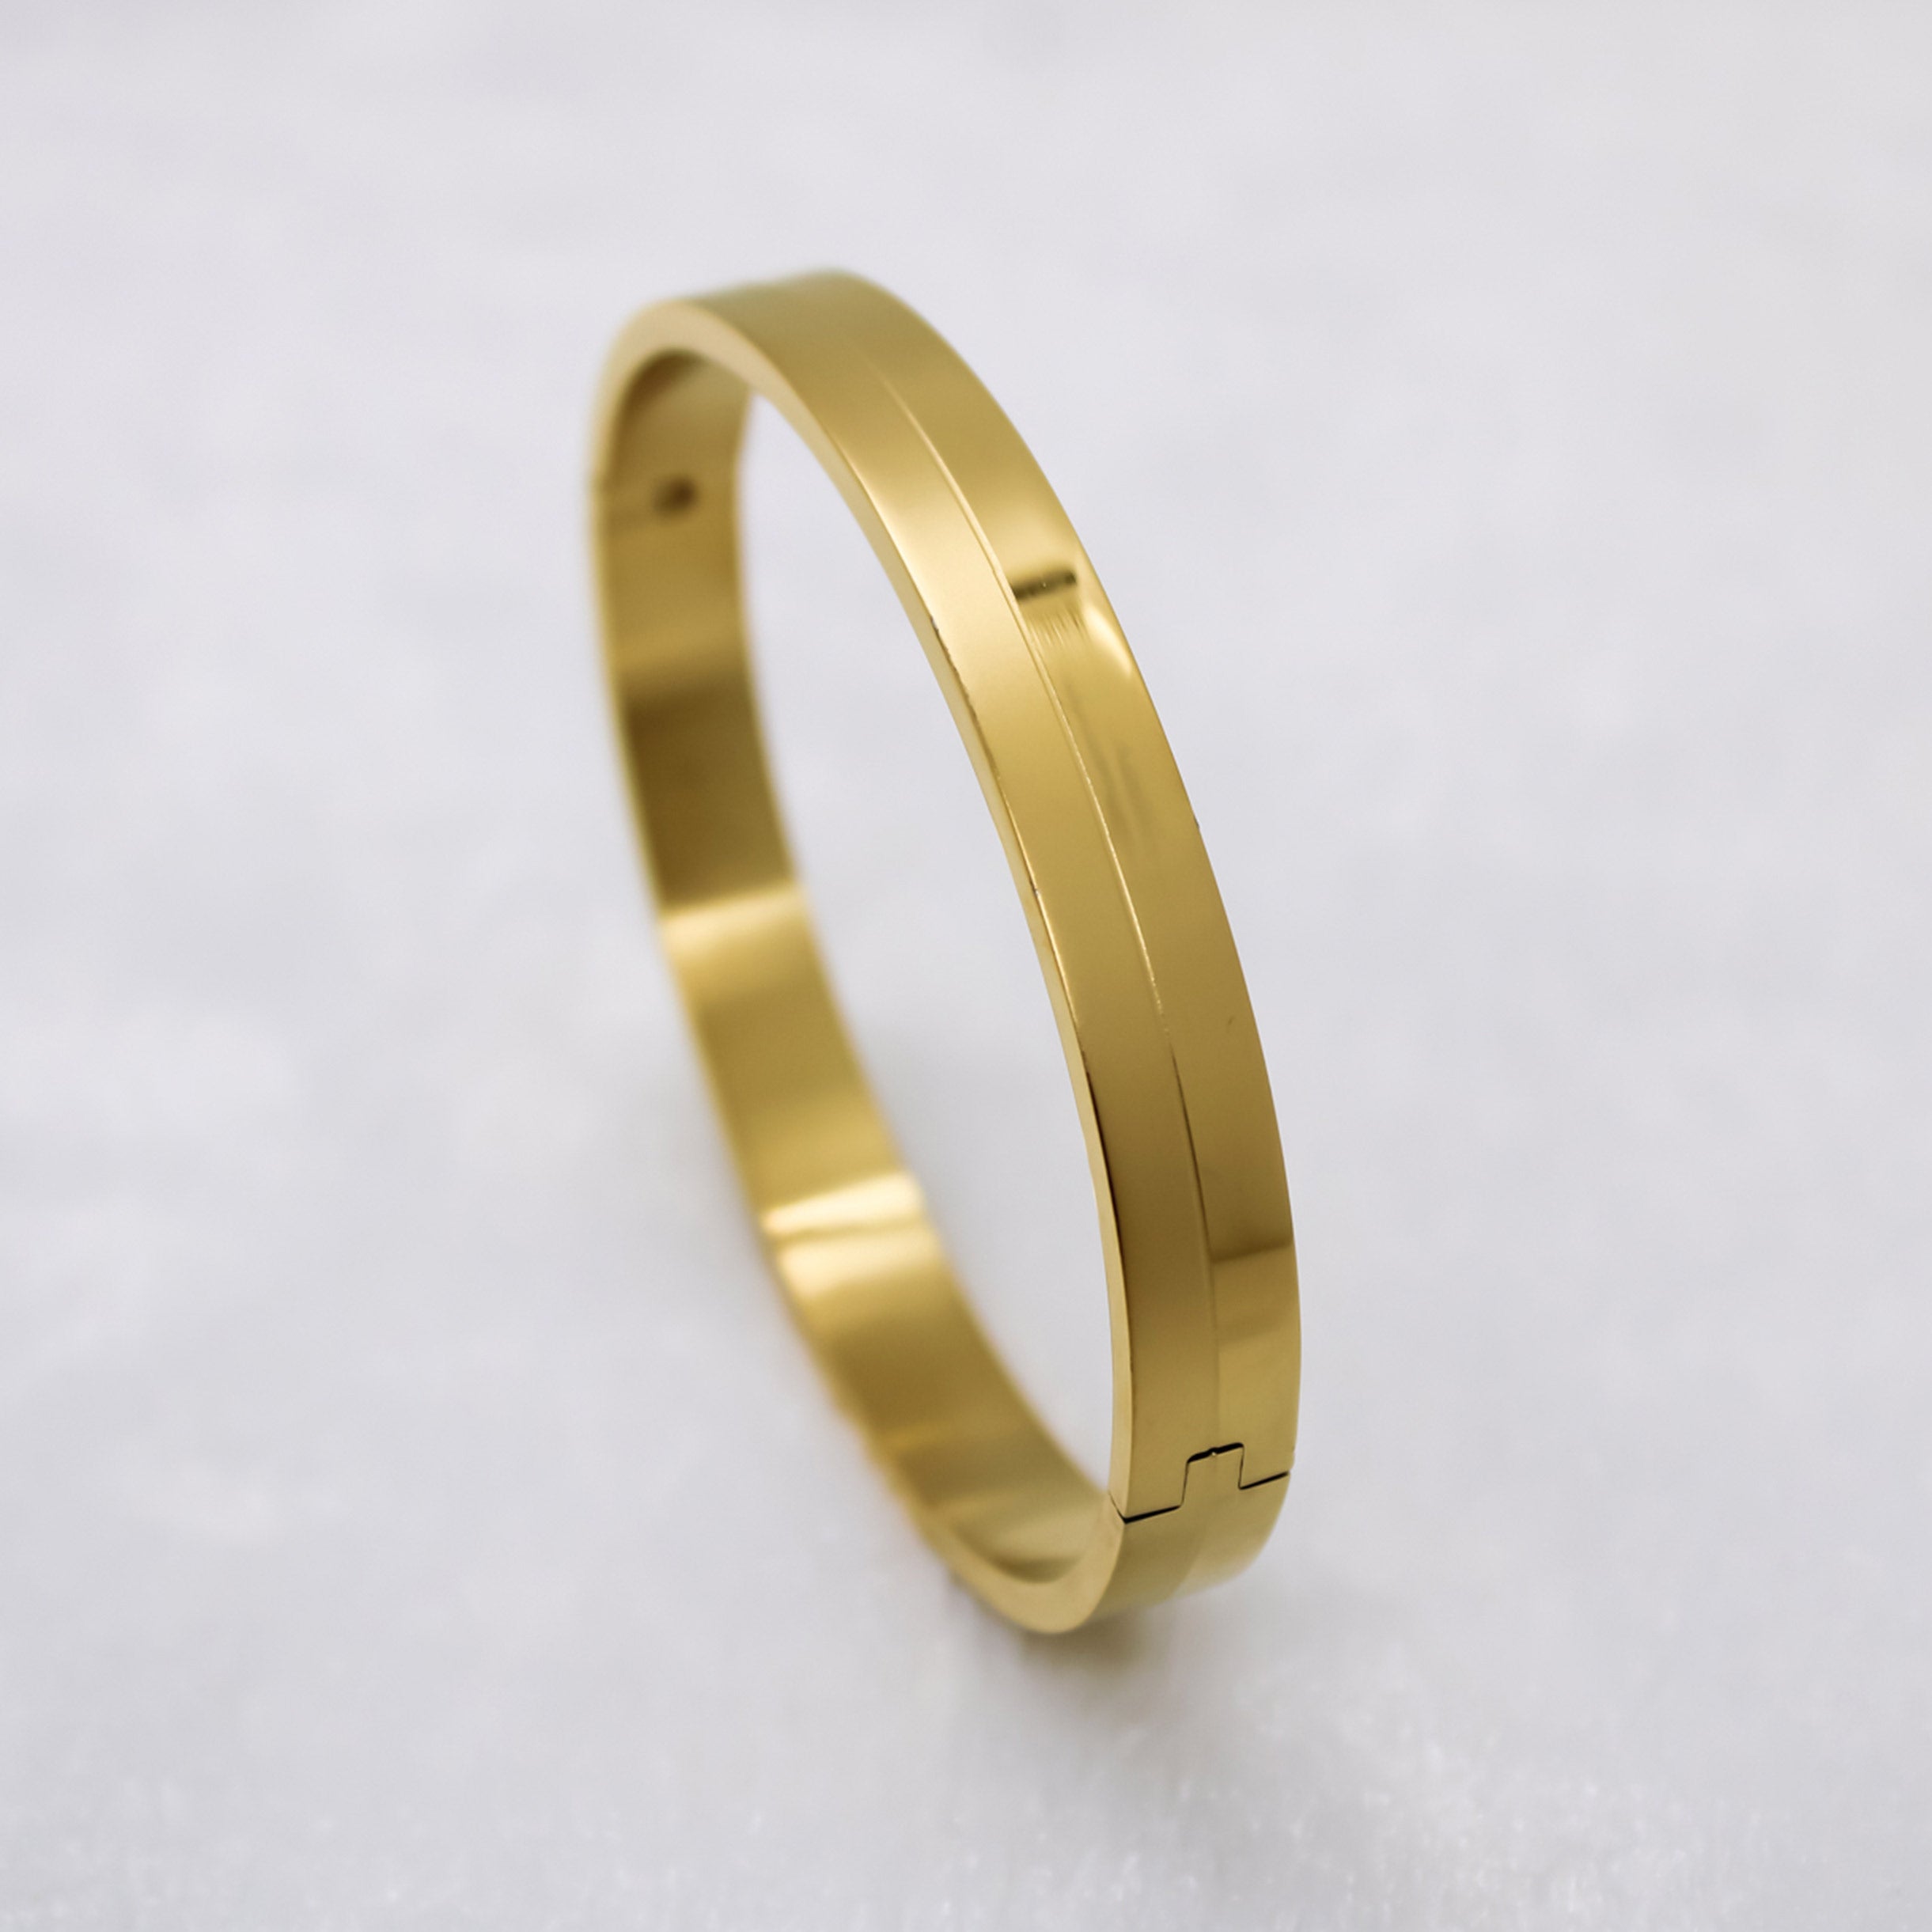 916 gold broad casting lucky bracelet | Man gold bracelet design, Mens gold  jewelry, Mens bracelet gold jewelry